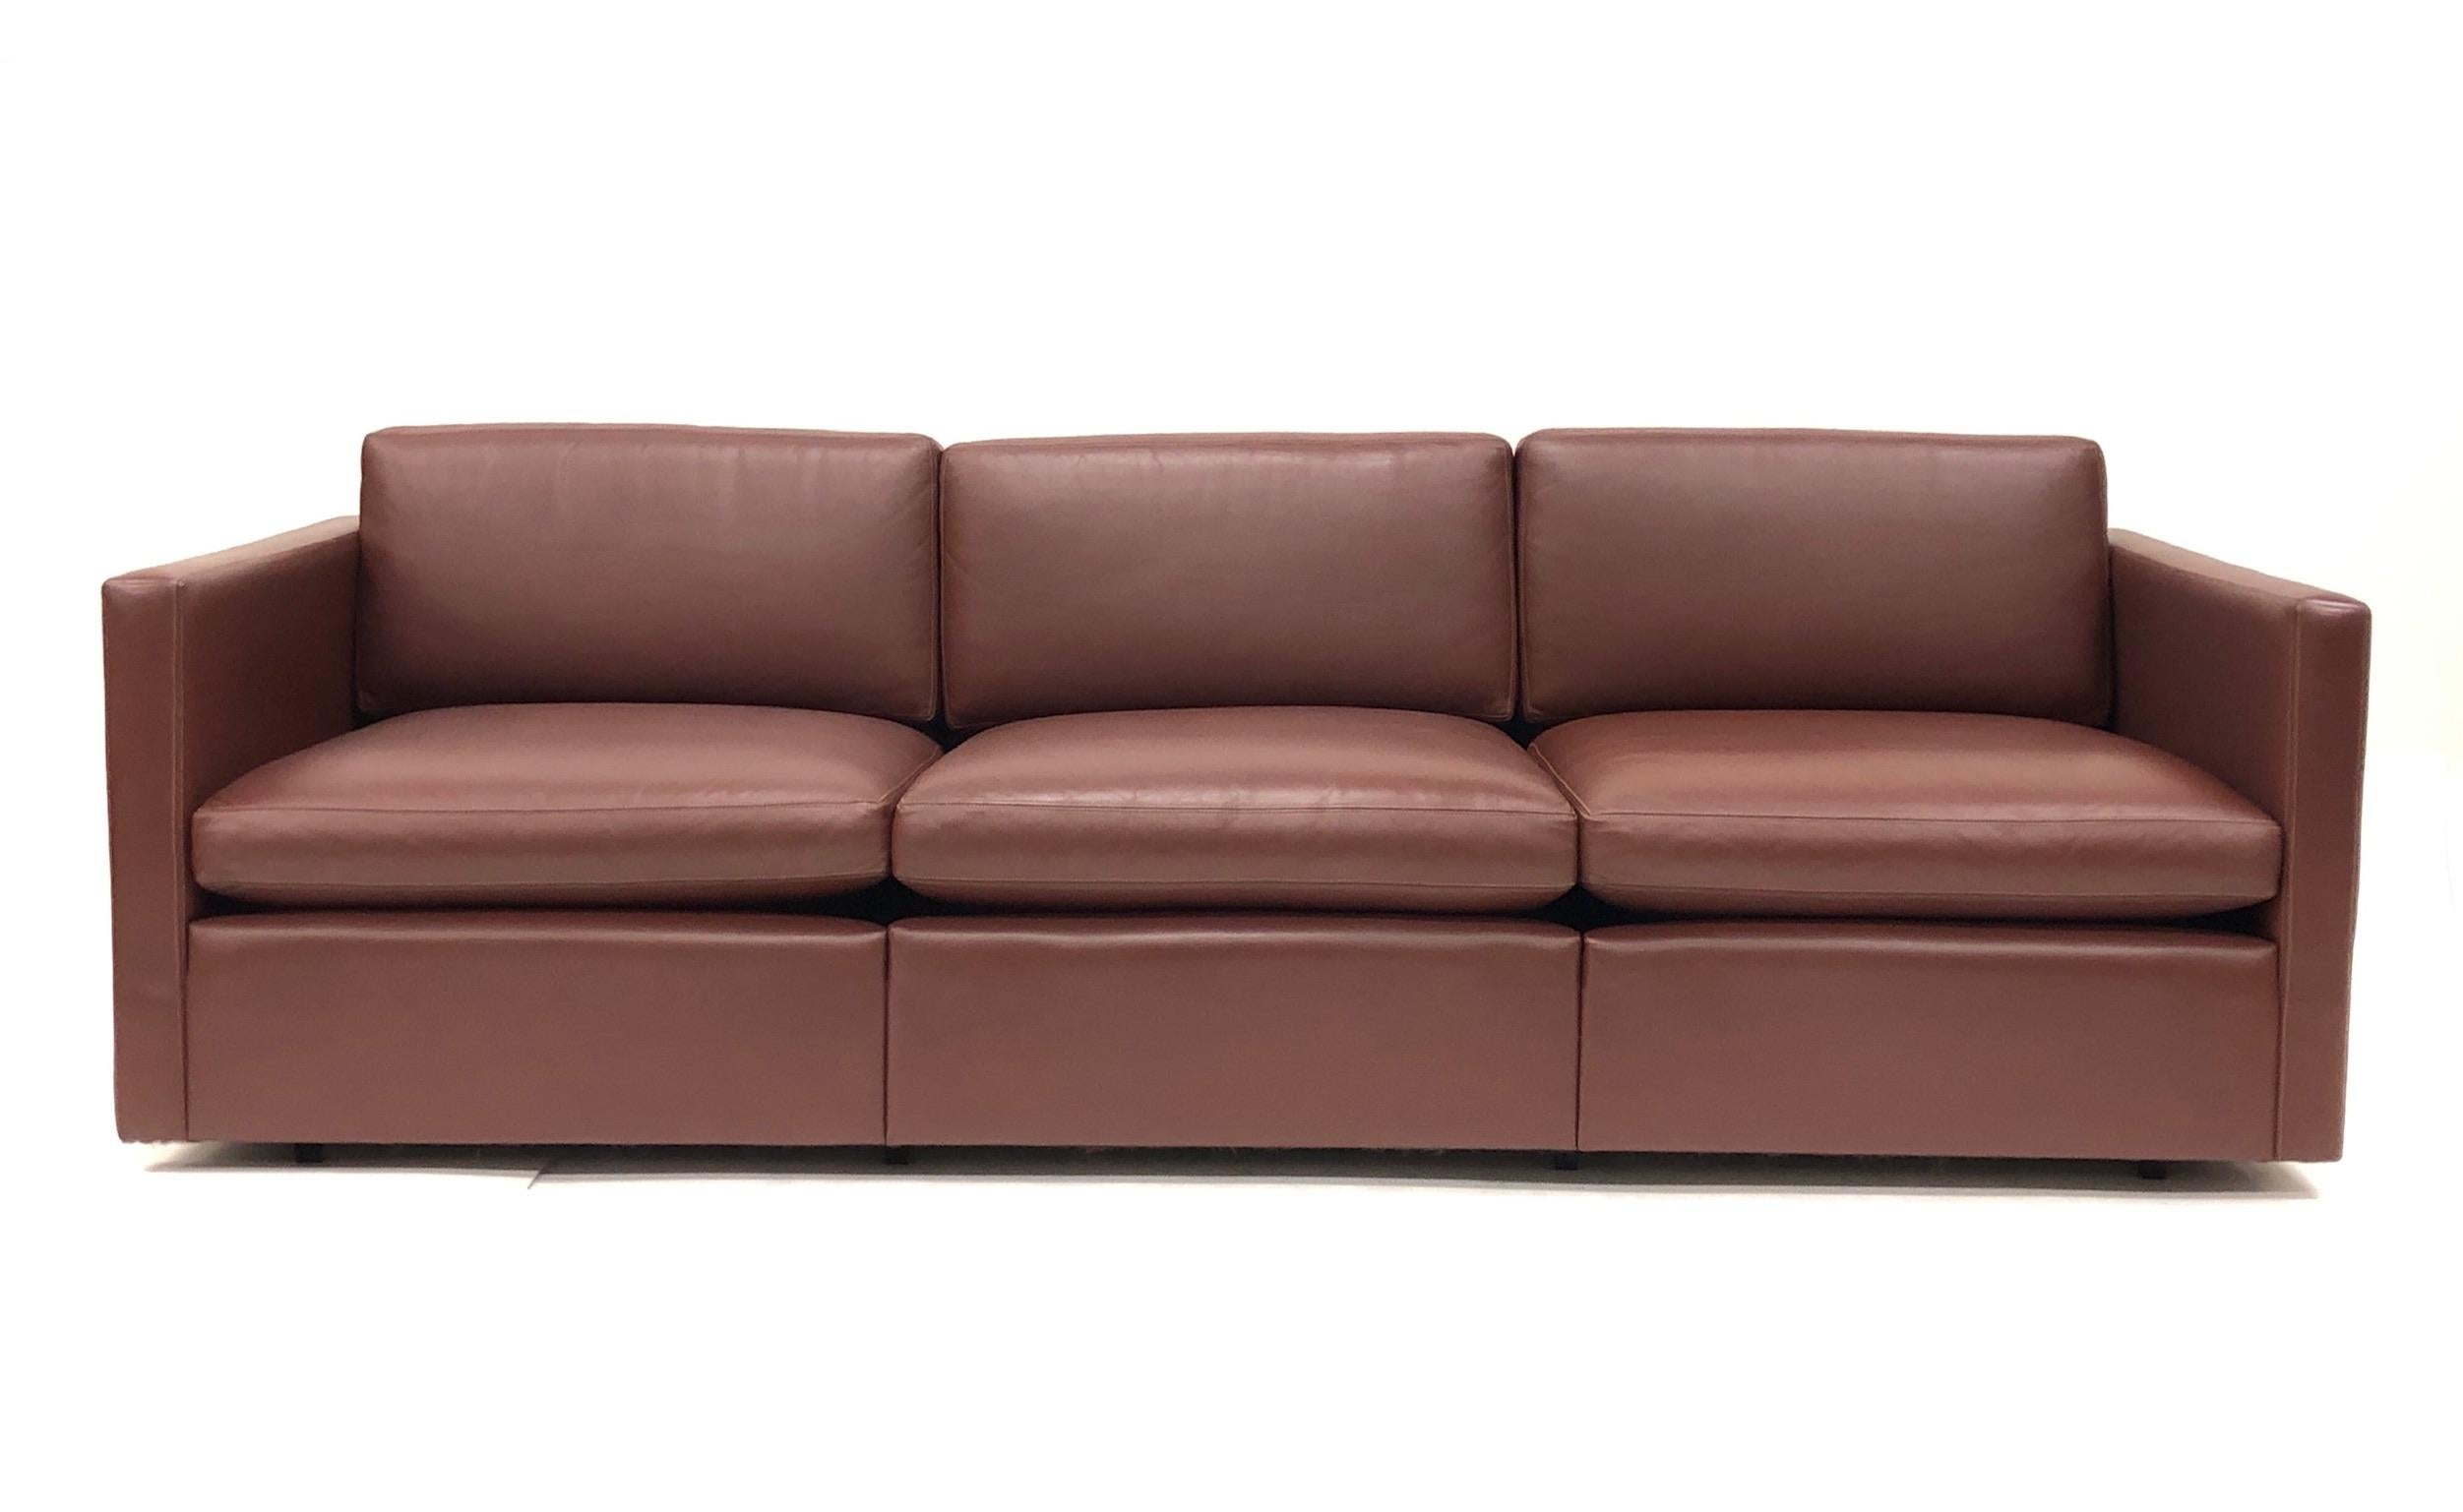 Burgundy Leather Sofa by Charles Pfister for Knoll 4